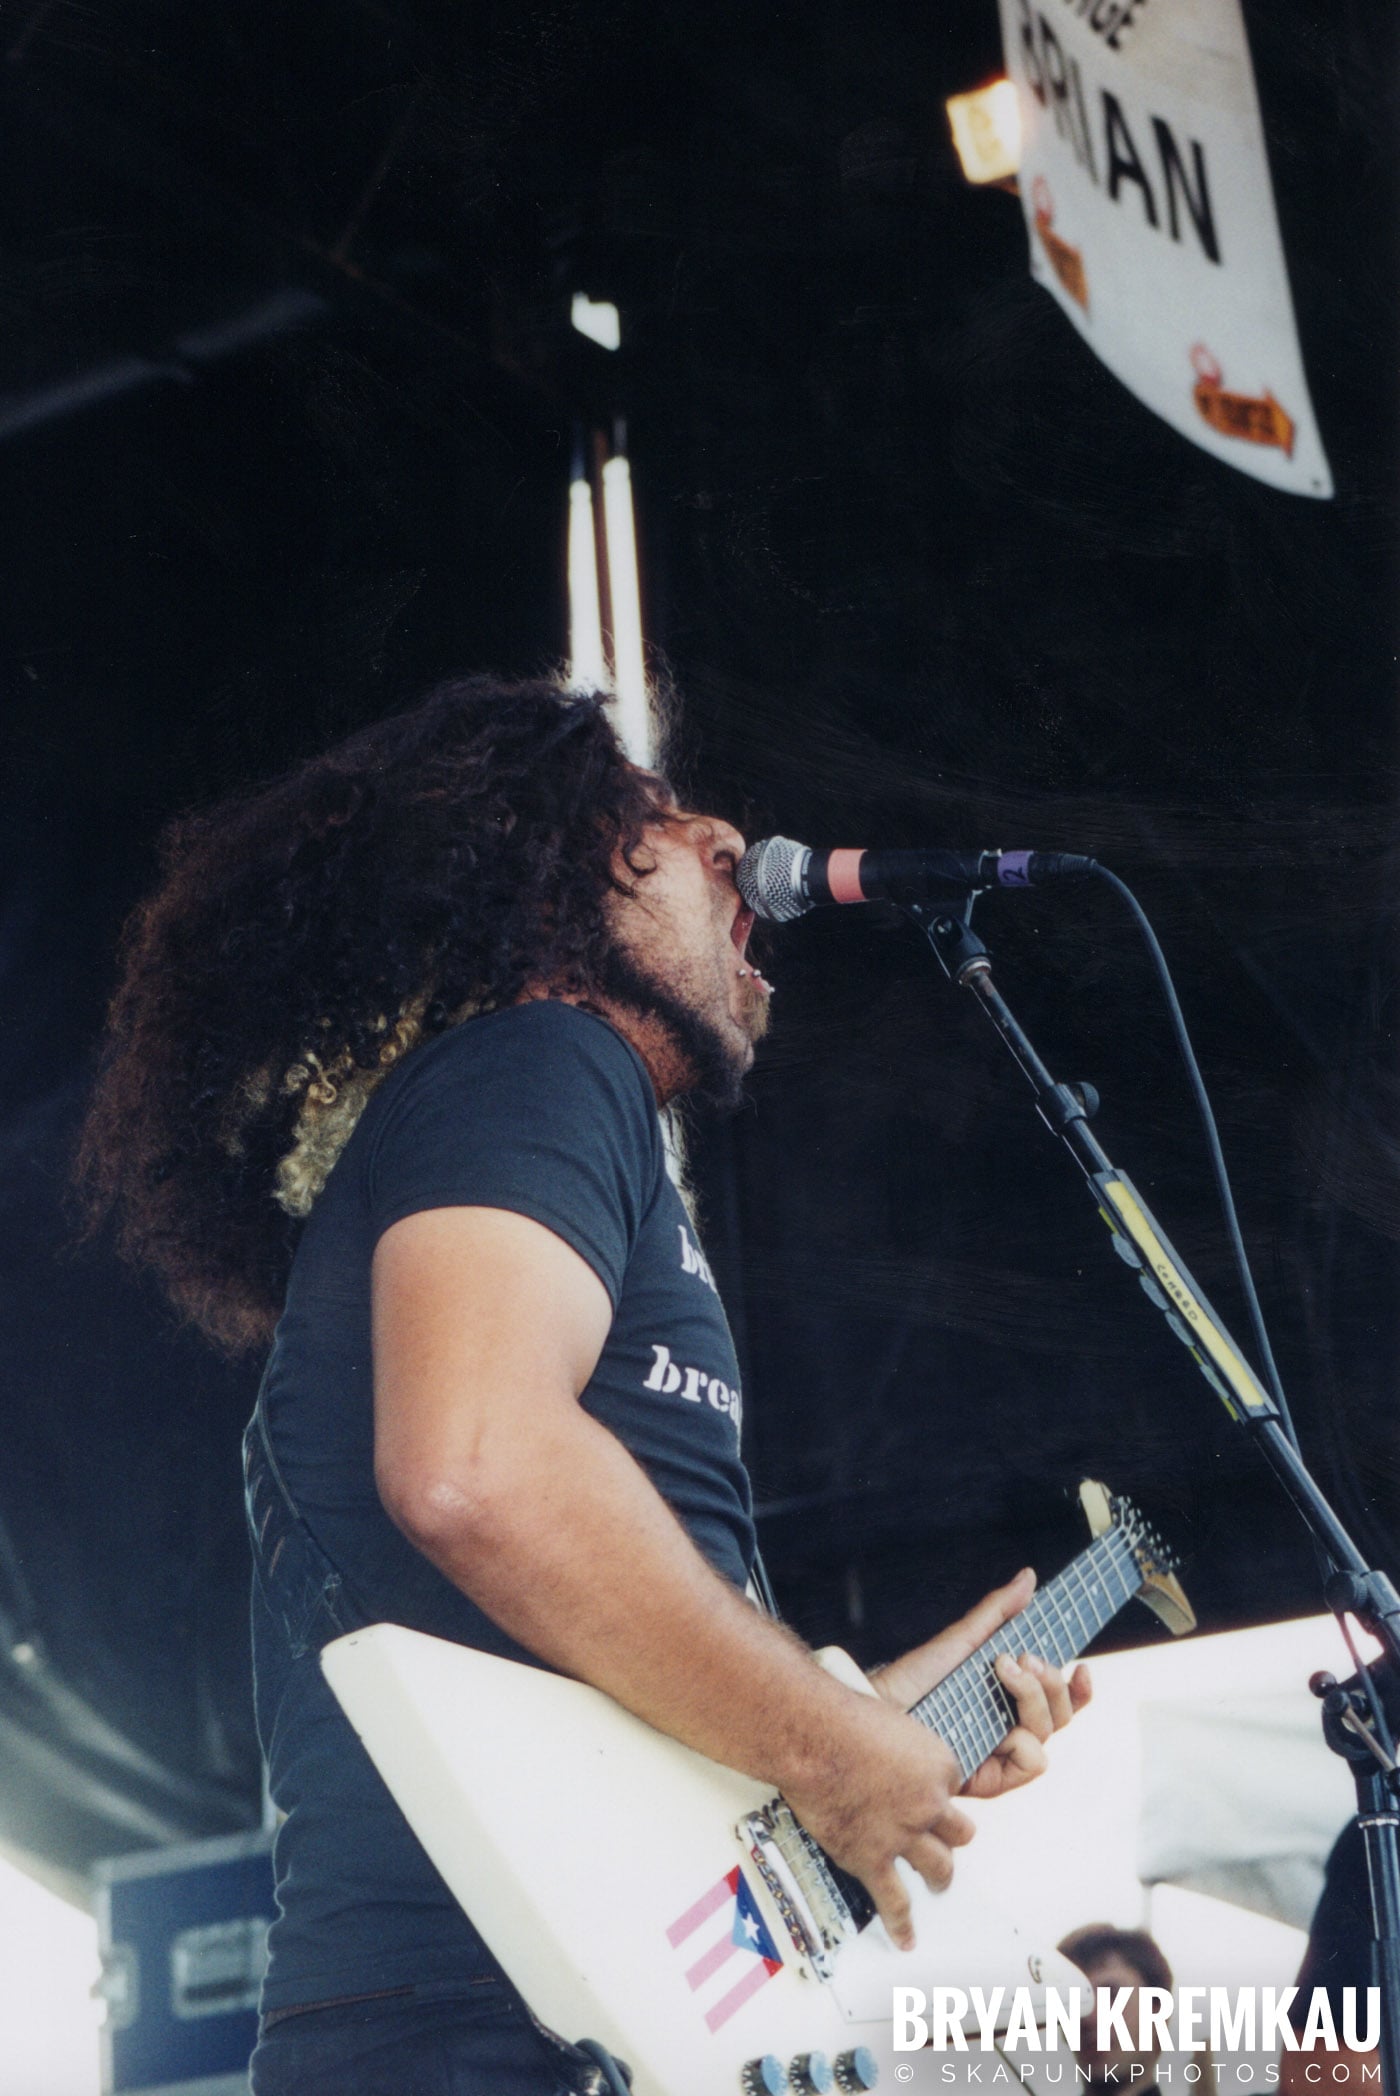 Coheed and Cambria @ Vans Warped Tour, Randall's Island, NYC - 8.7.04 (17)